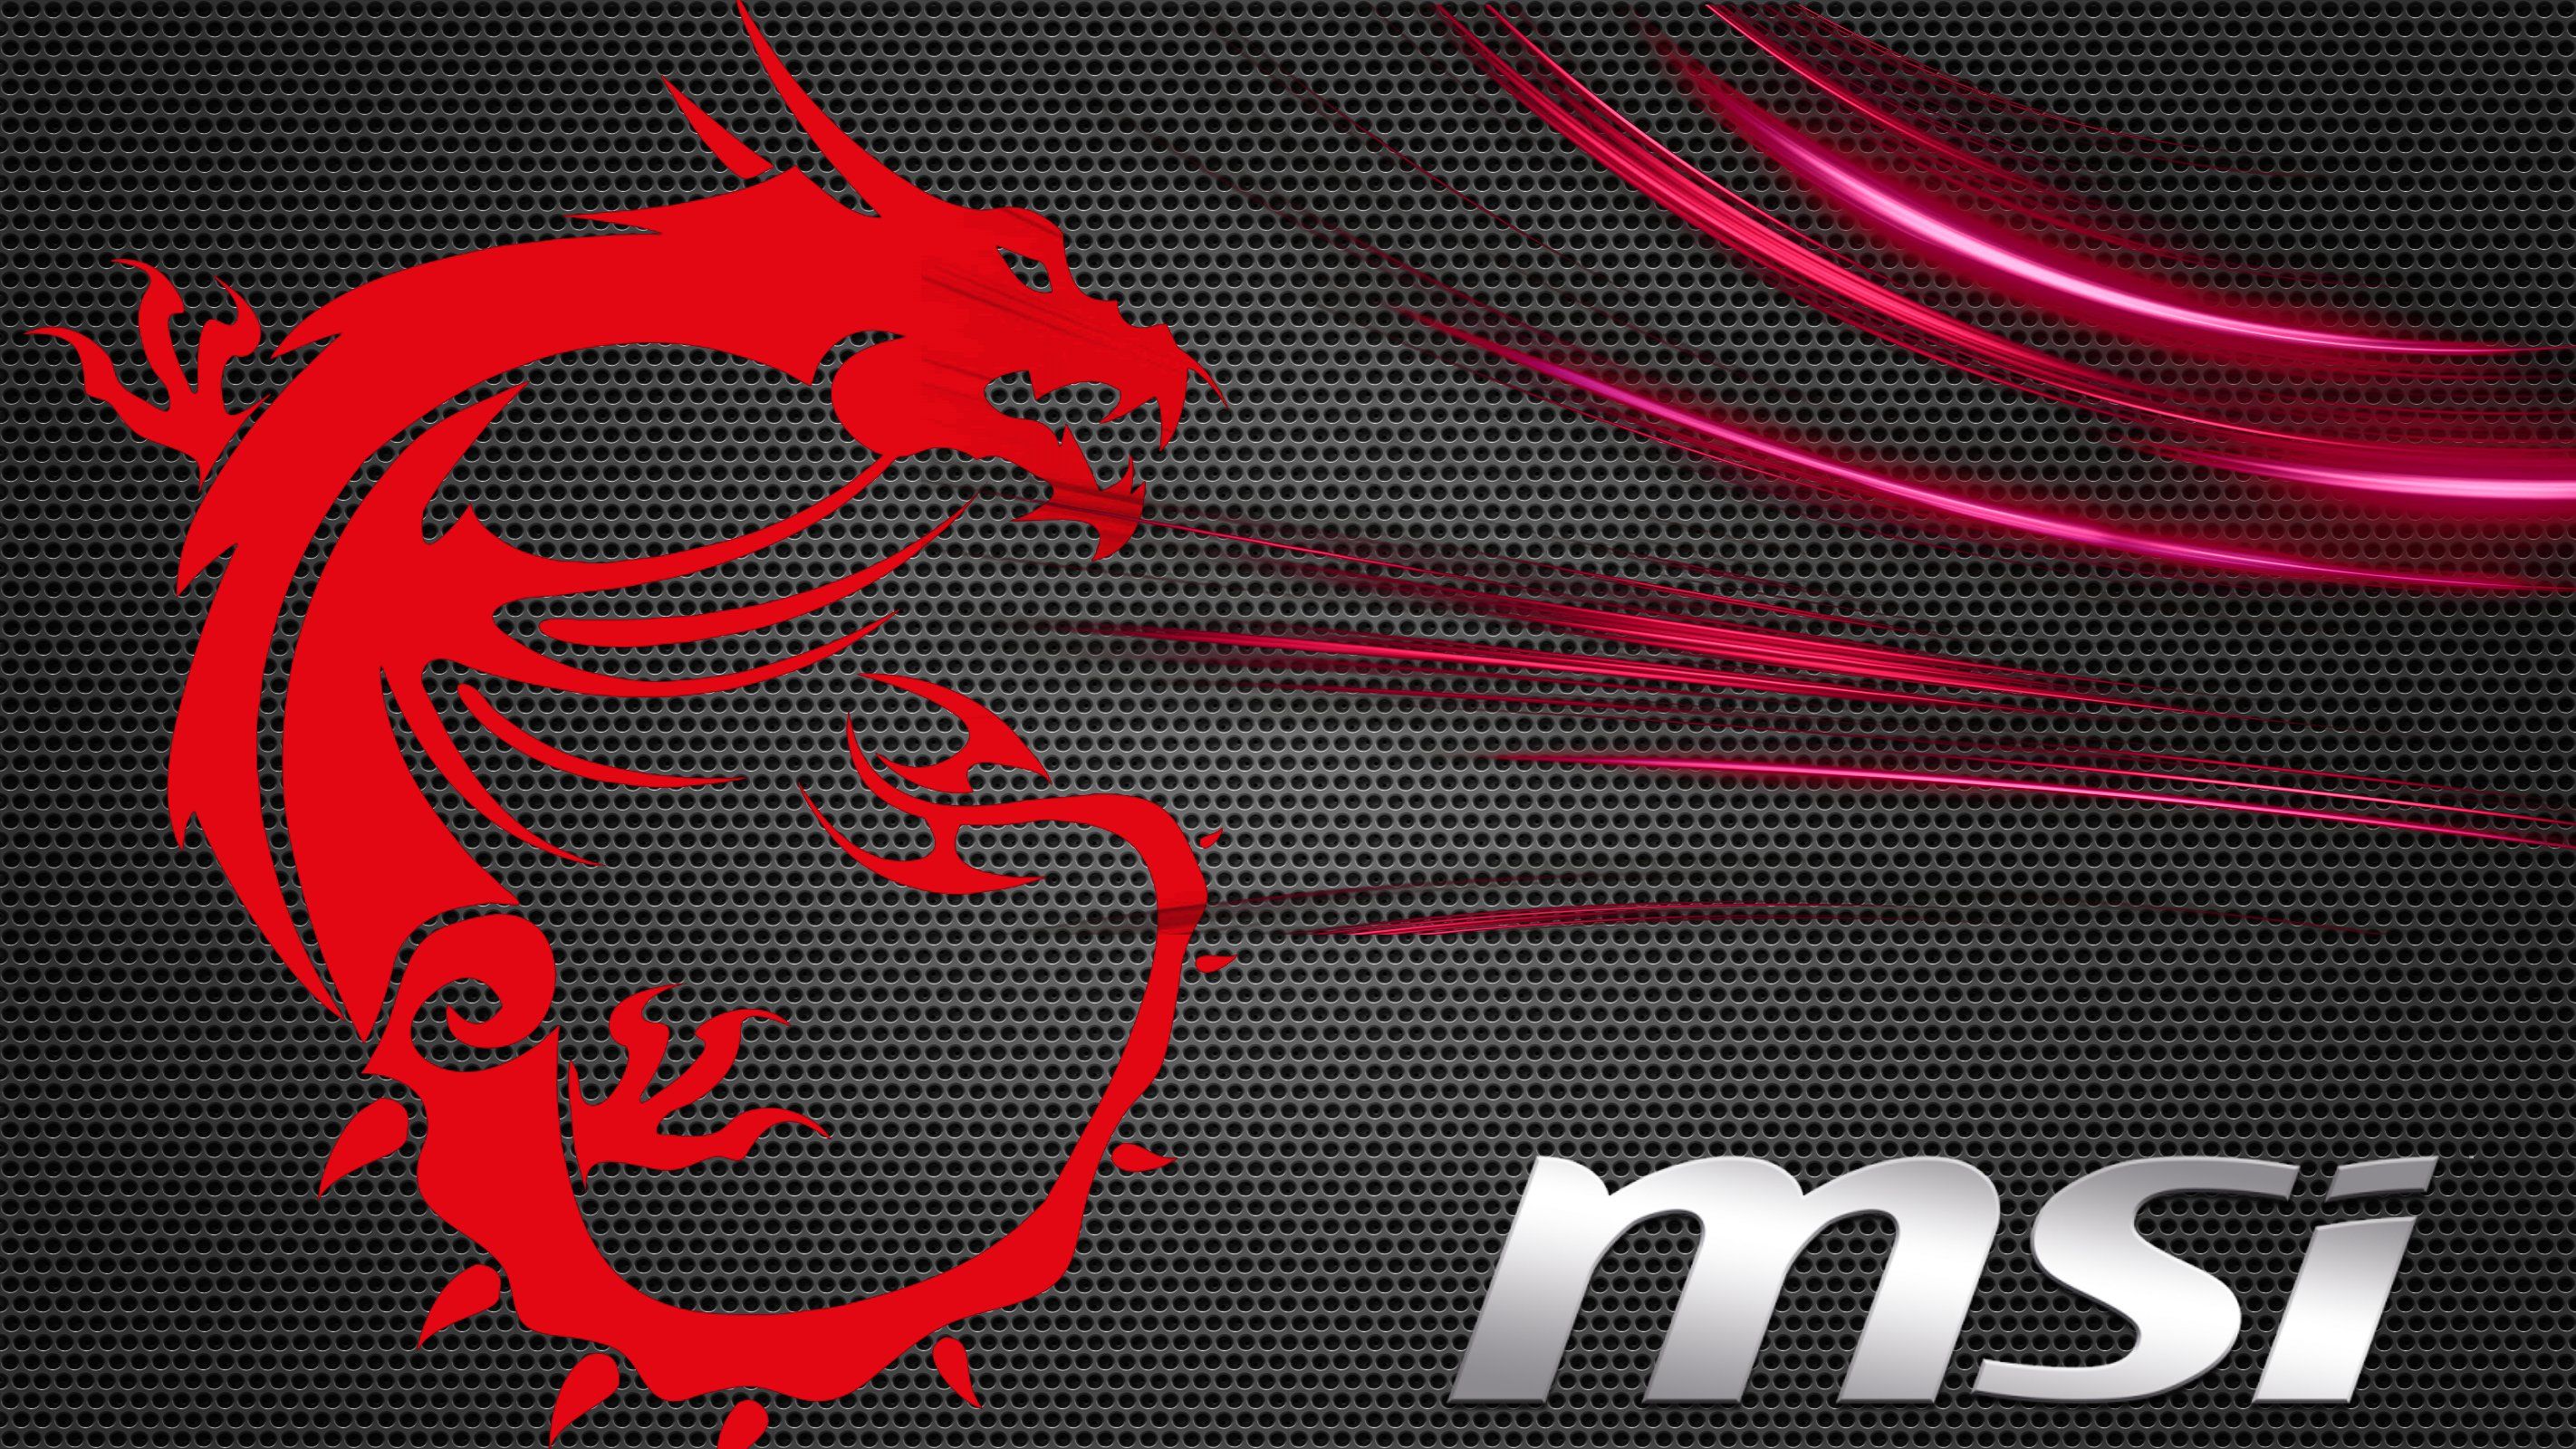 New MSI Wallpaper Full HD Pictures